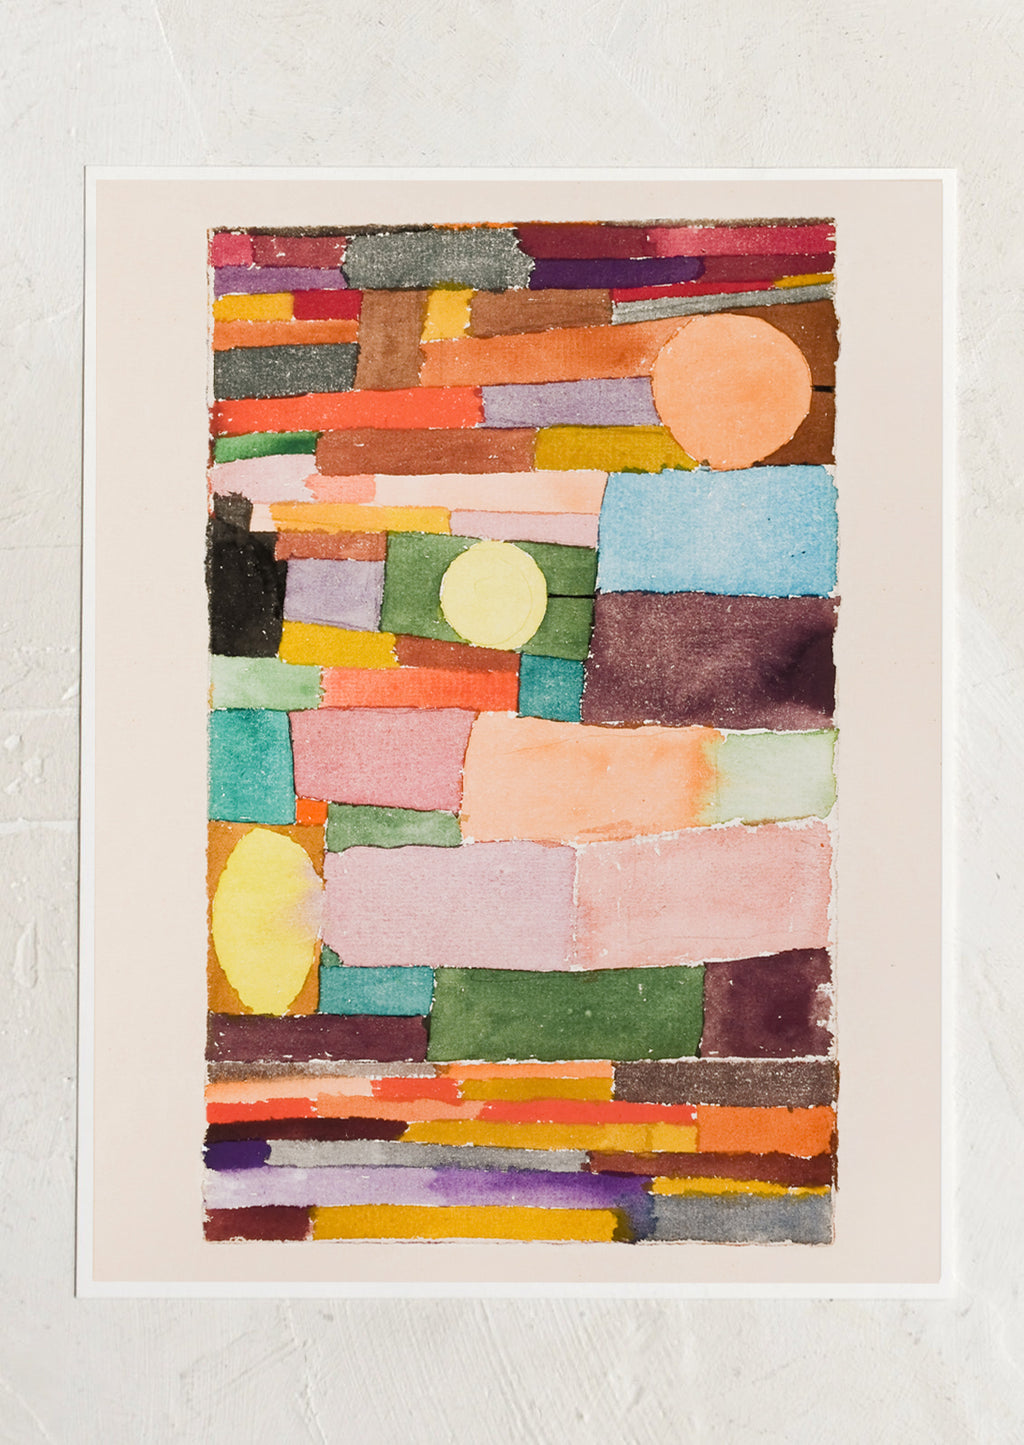 1: An art print of colorful abstract shapes stacked together.